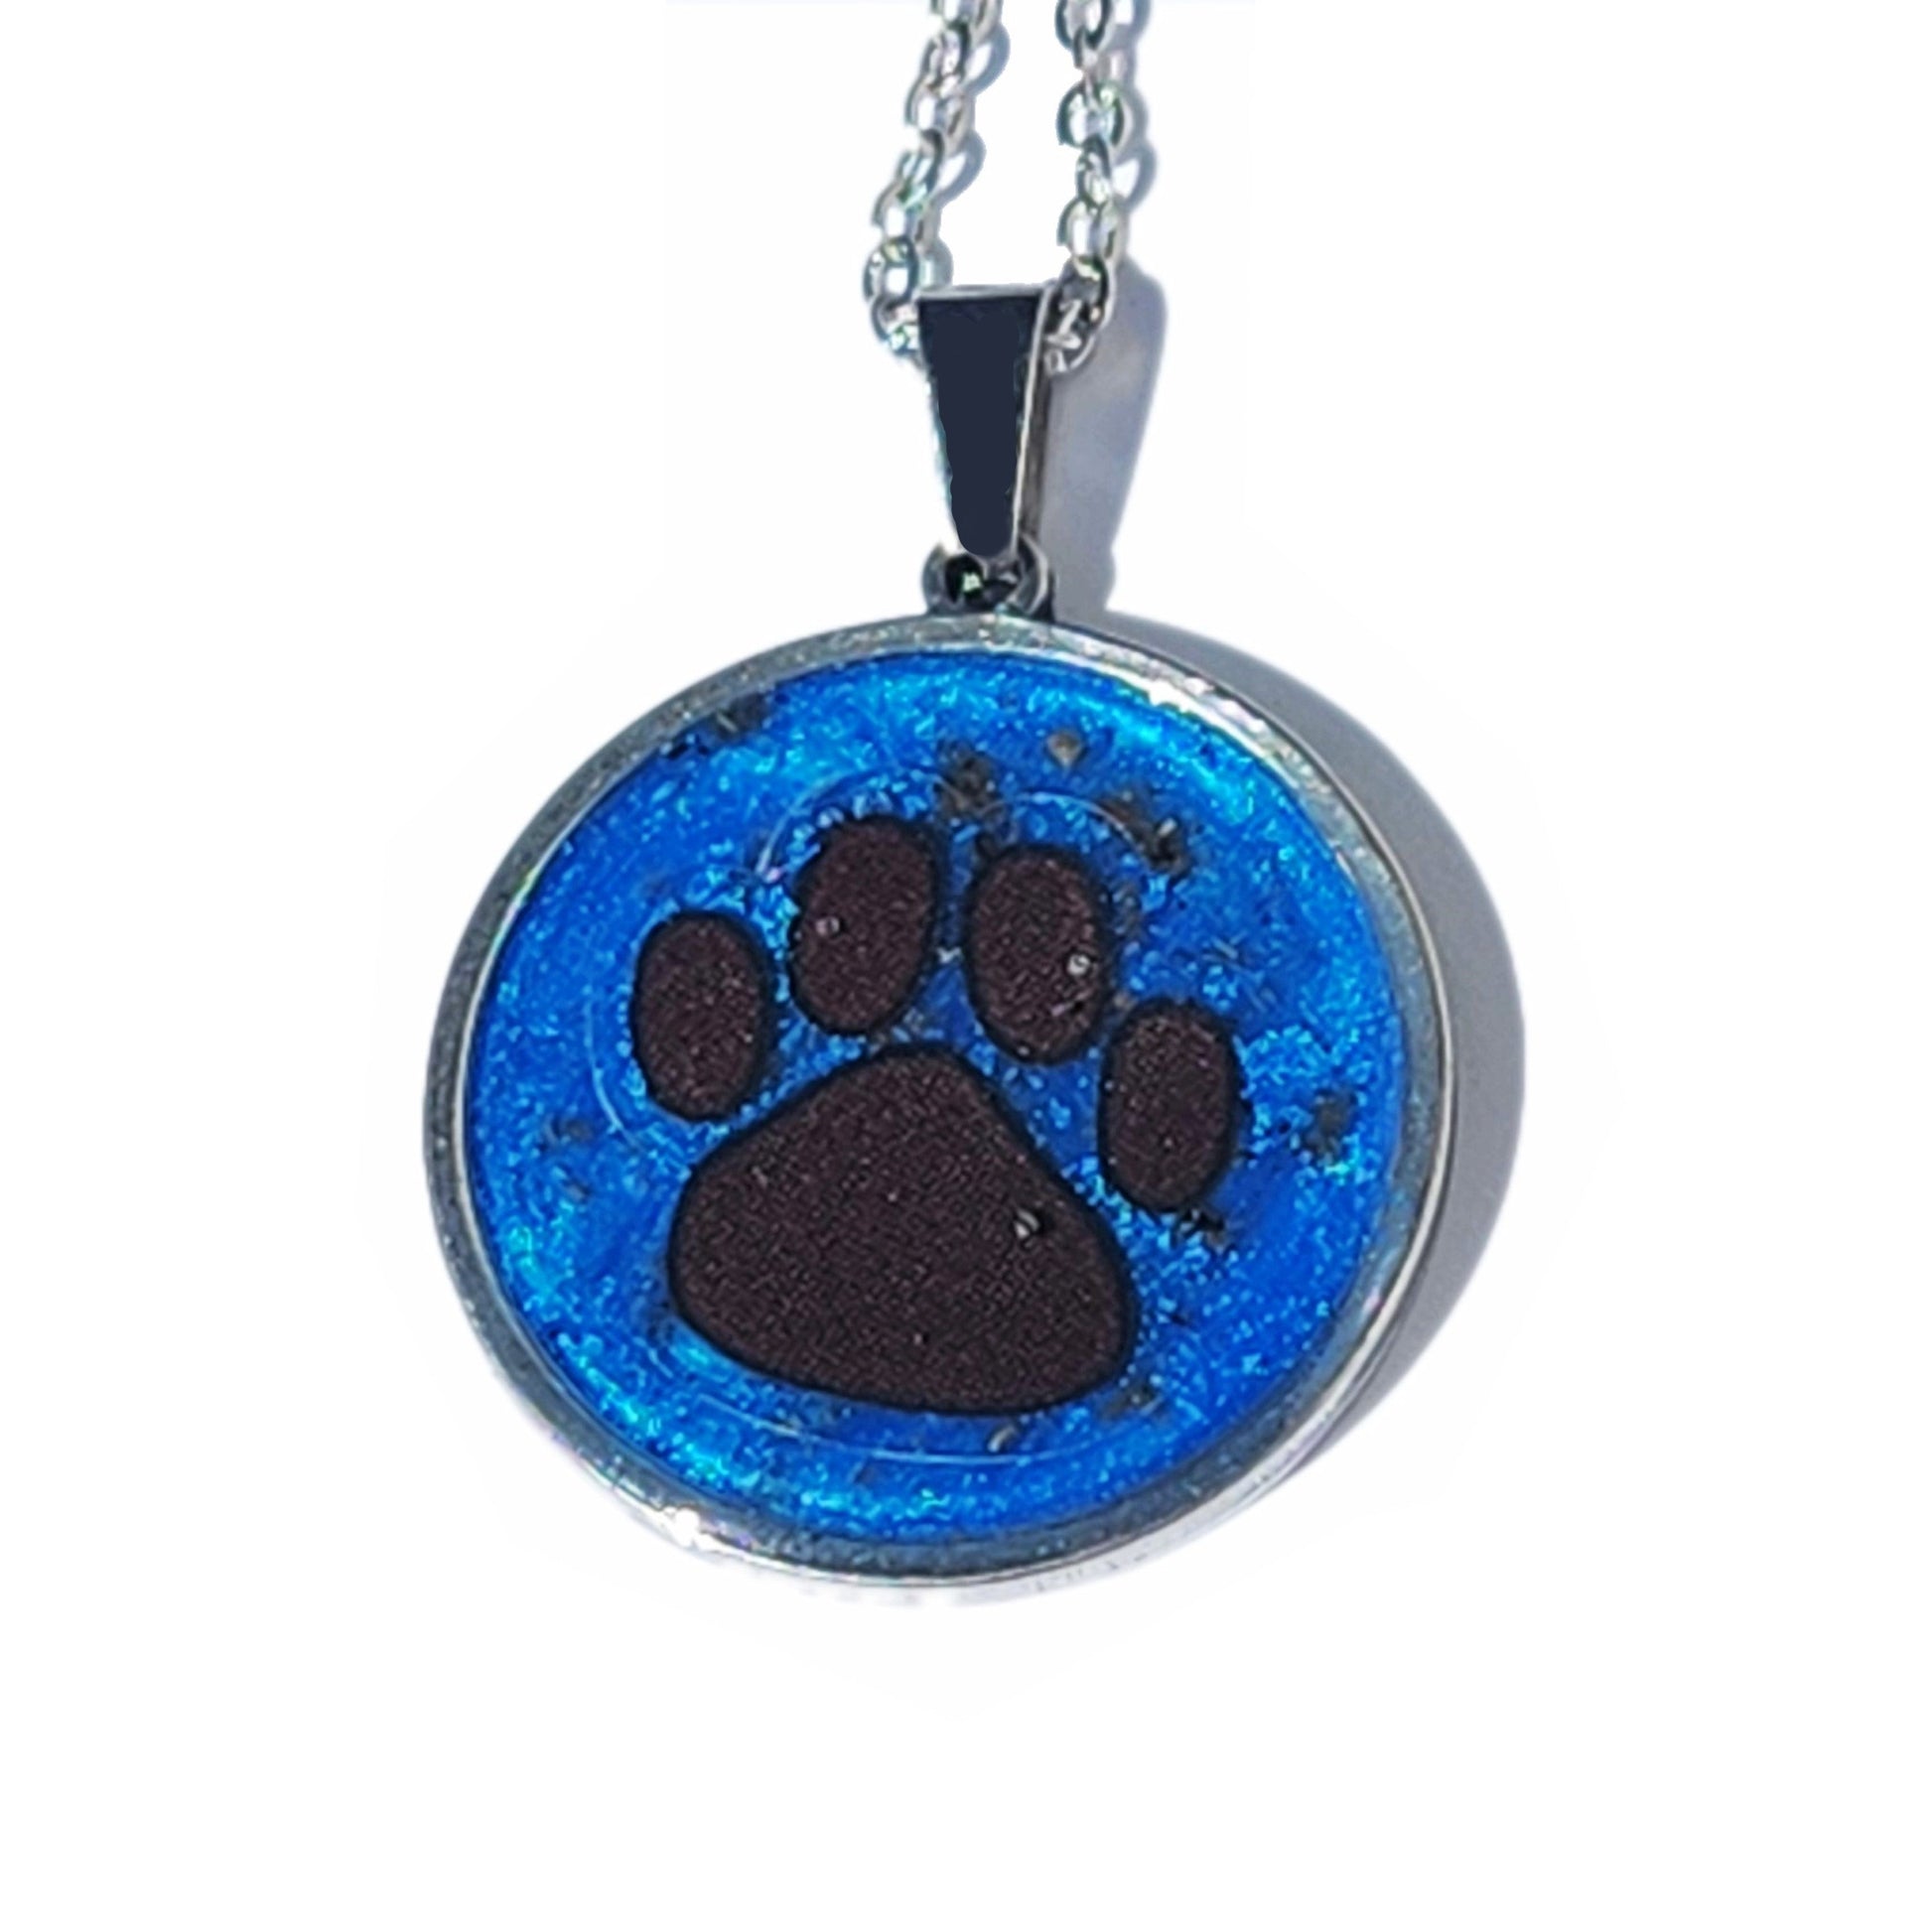 The Paw Print cremation pendant-Pendant-DragonFire Glass-DragonFire Cremation Jewelry